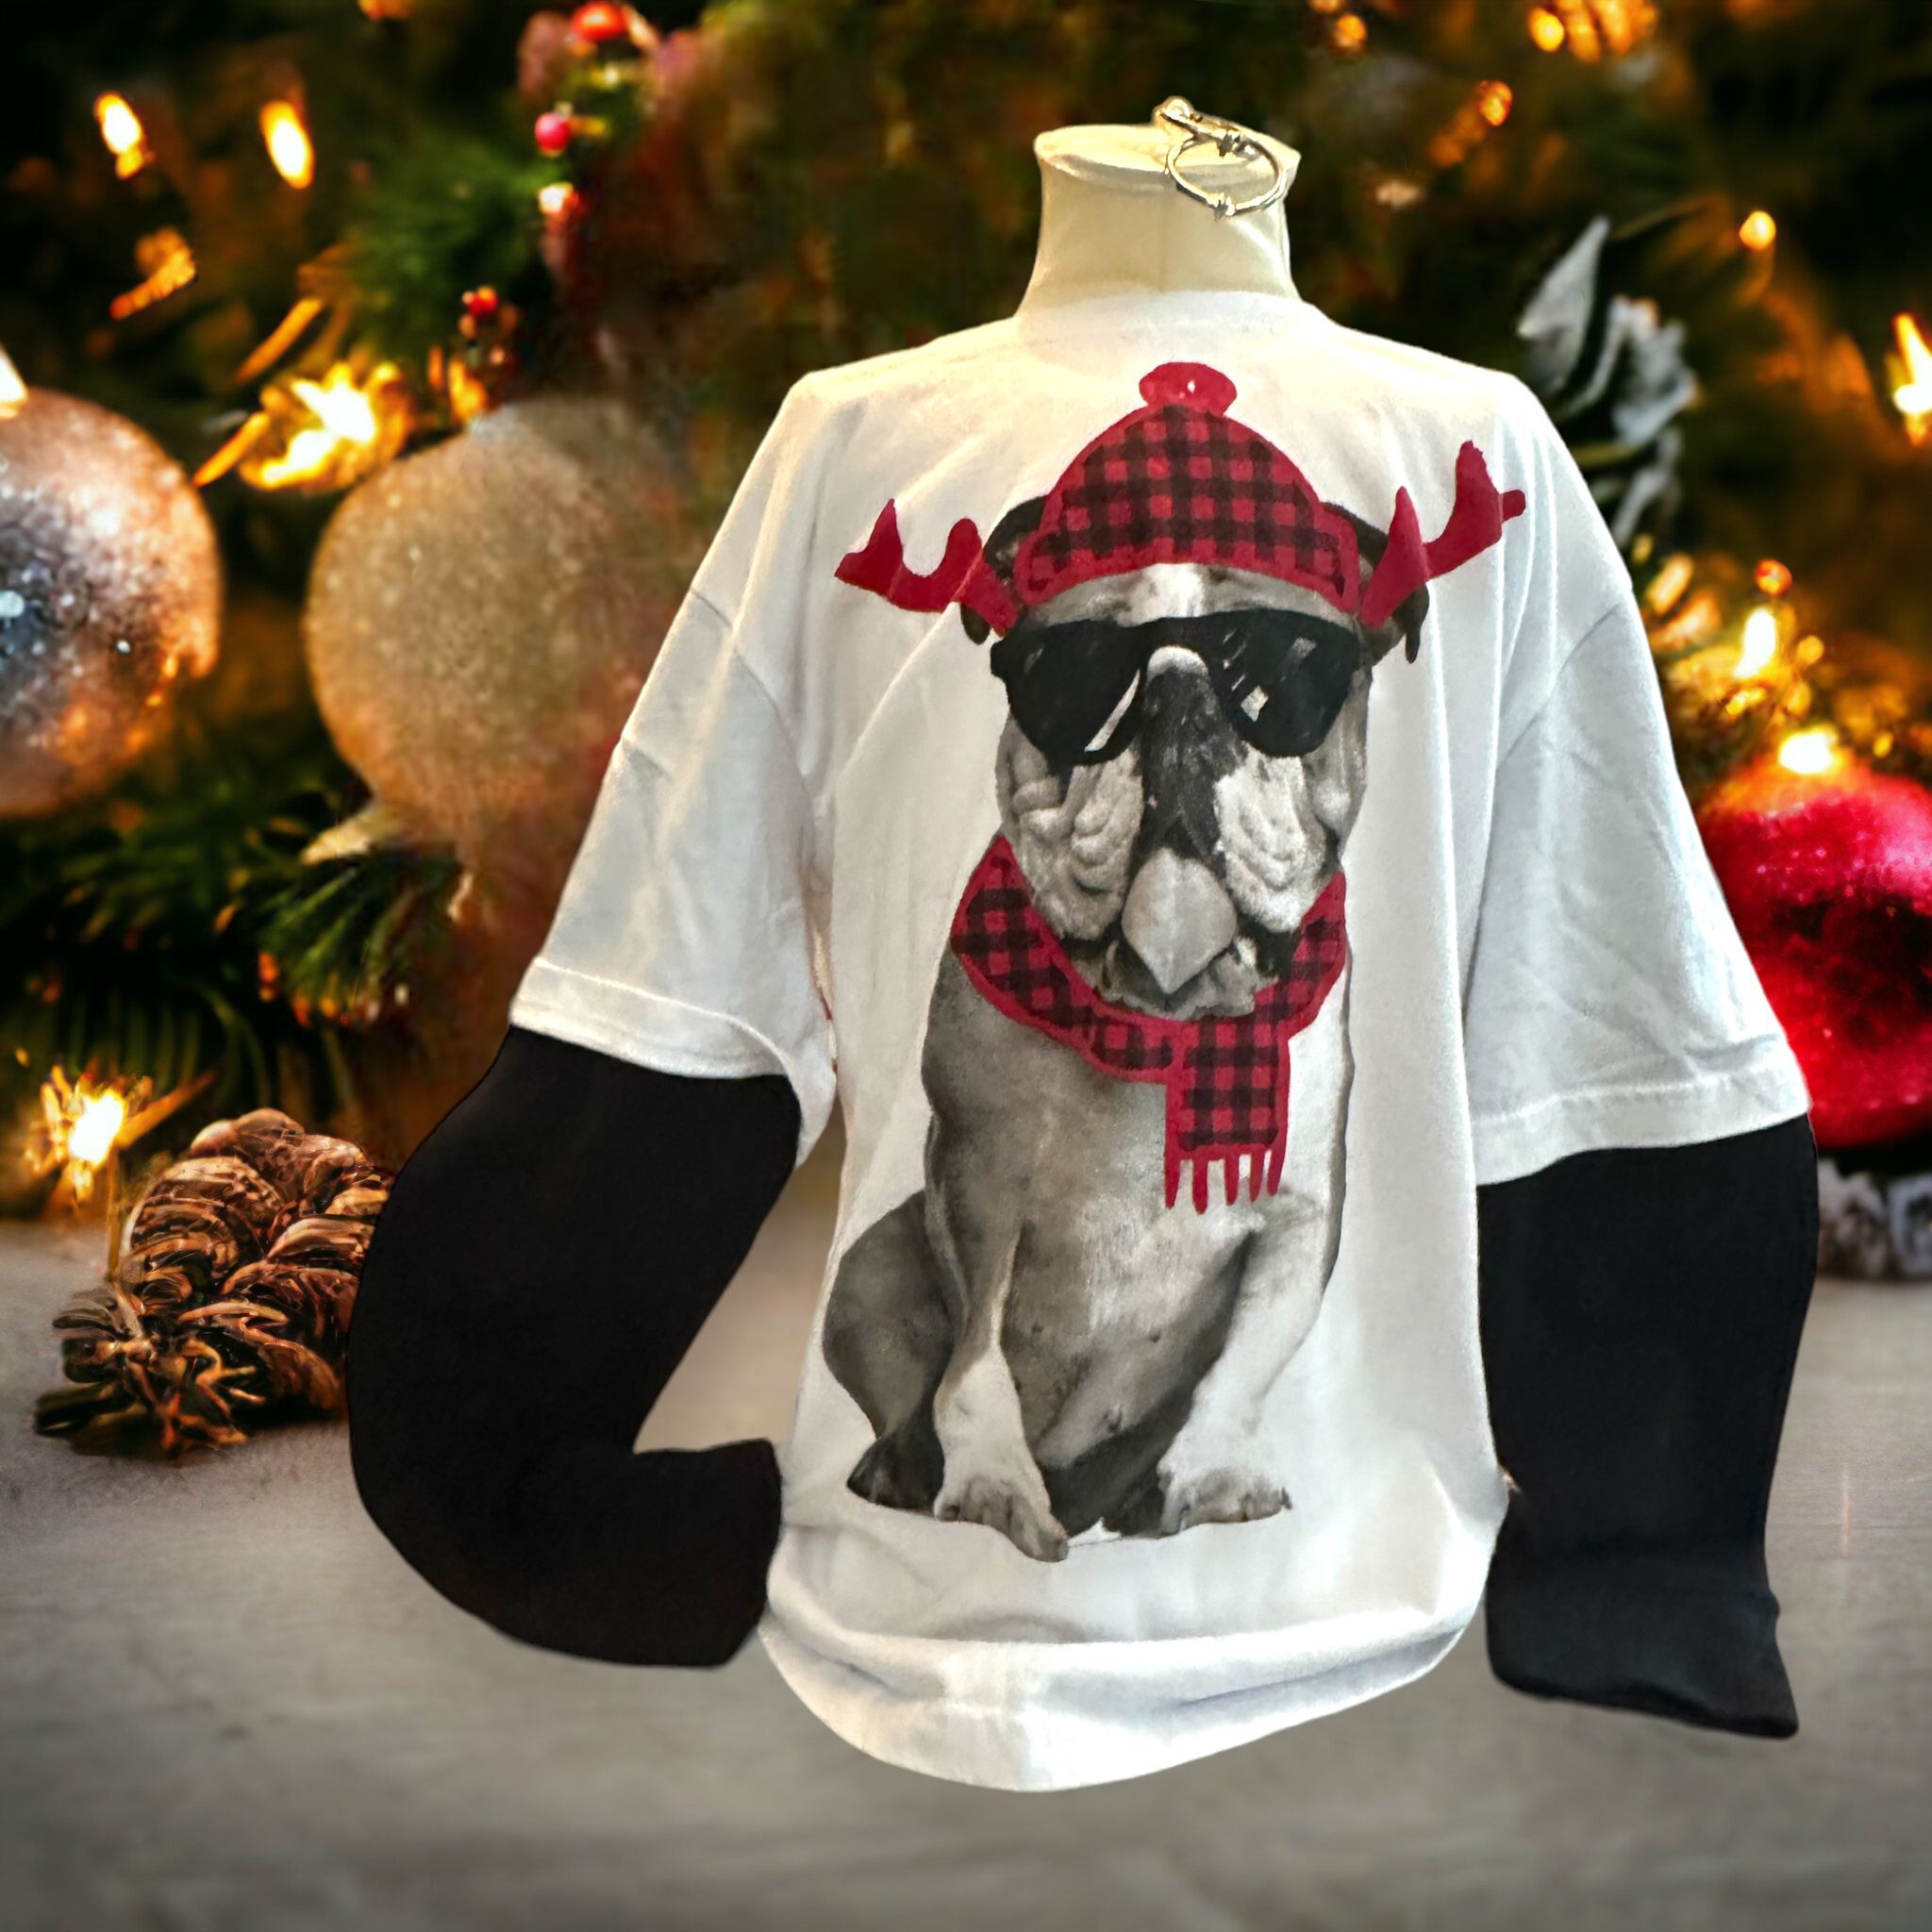 Children’s Place Small Christmas Shirt